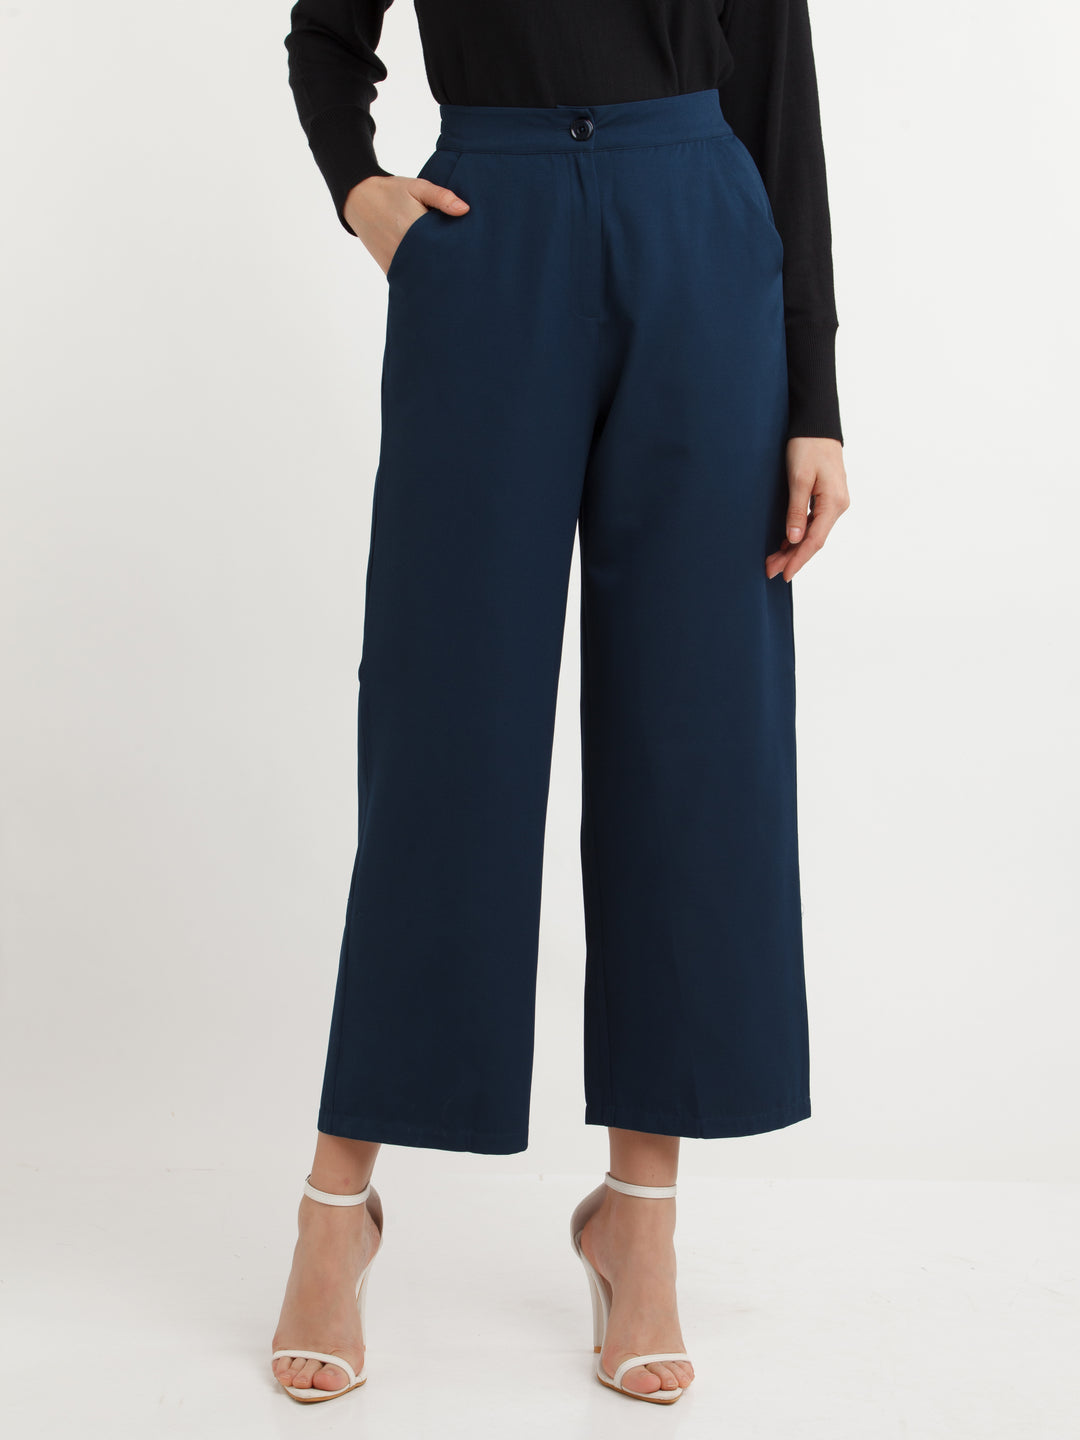 Navy Blue Solid Pants For Women